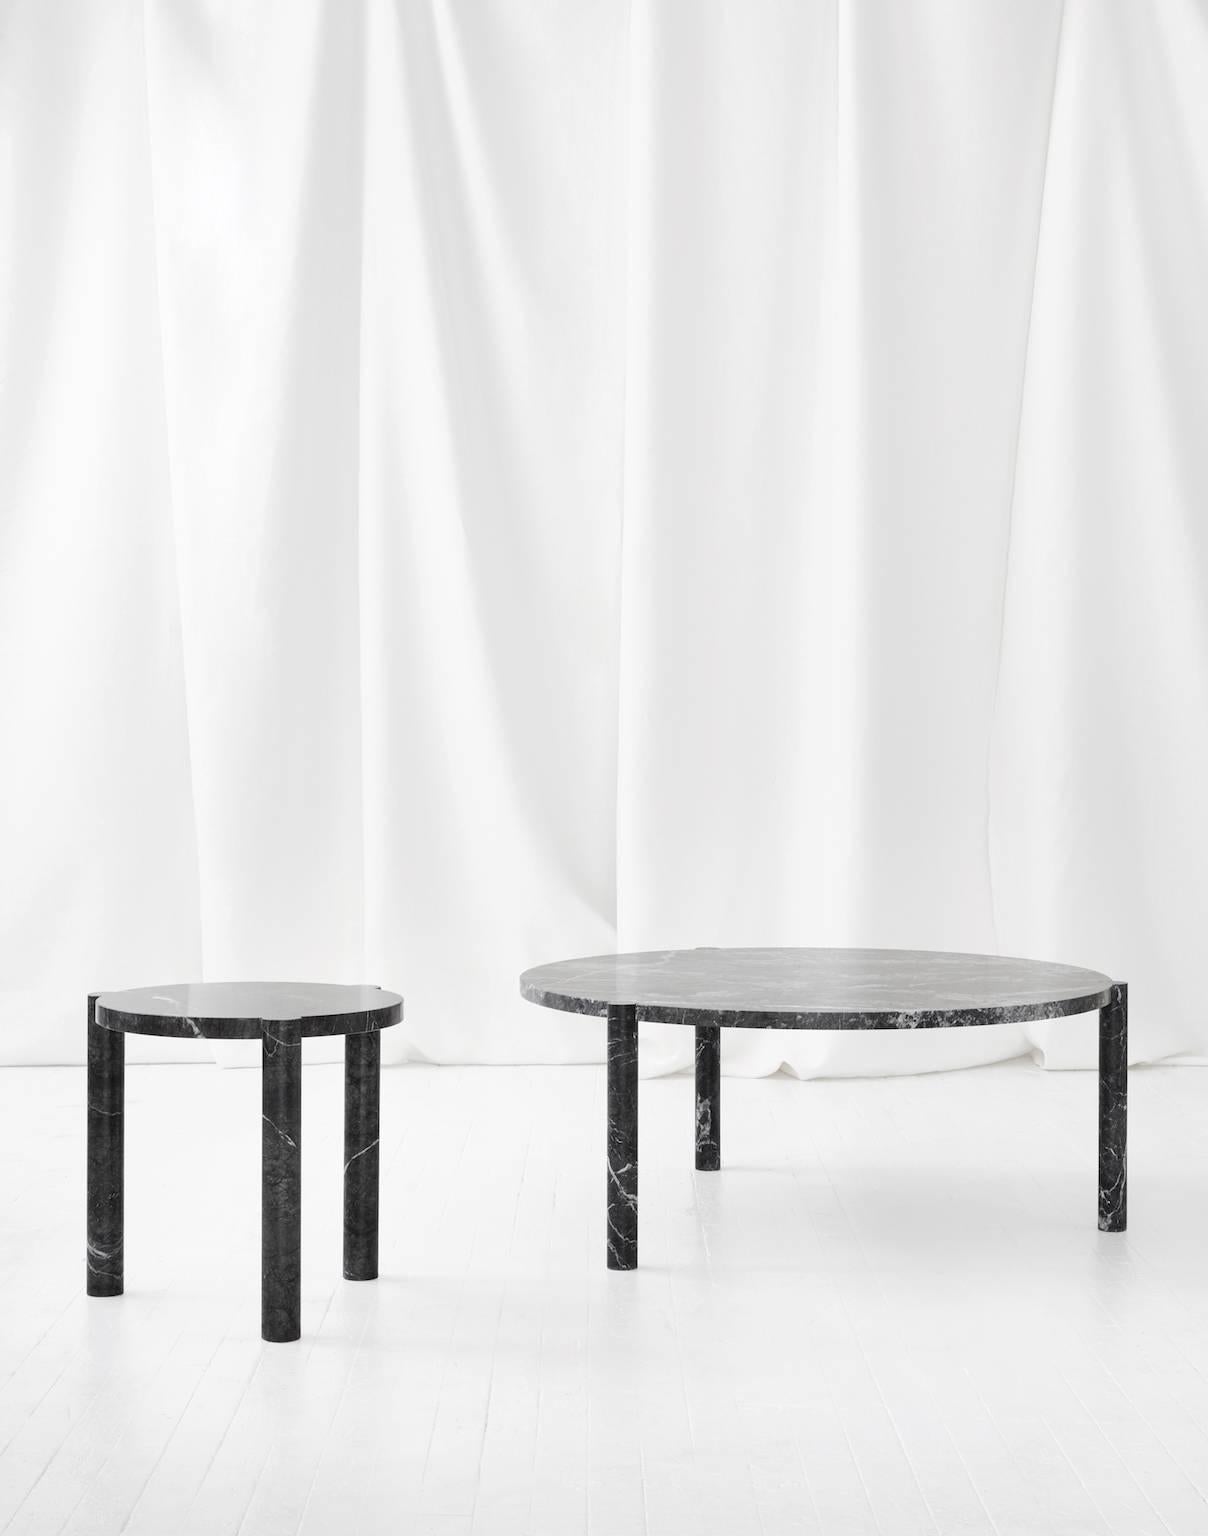 The WC1 cocktail table from ASH NYC is the perfect round cocktail table. The hand-turned legs join seamlessly with the top to create an elegant, handcrafted joint that defies gravity. Influenced by the great designers of the 1950s, Jean Prouvé,